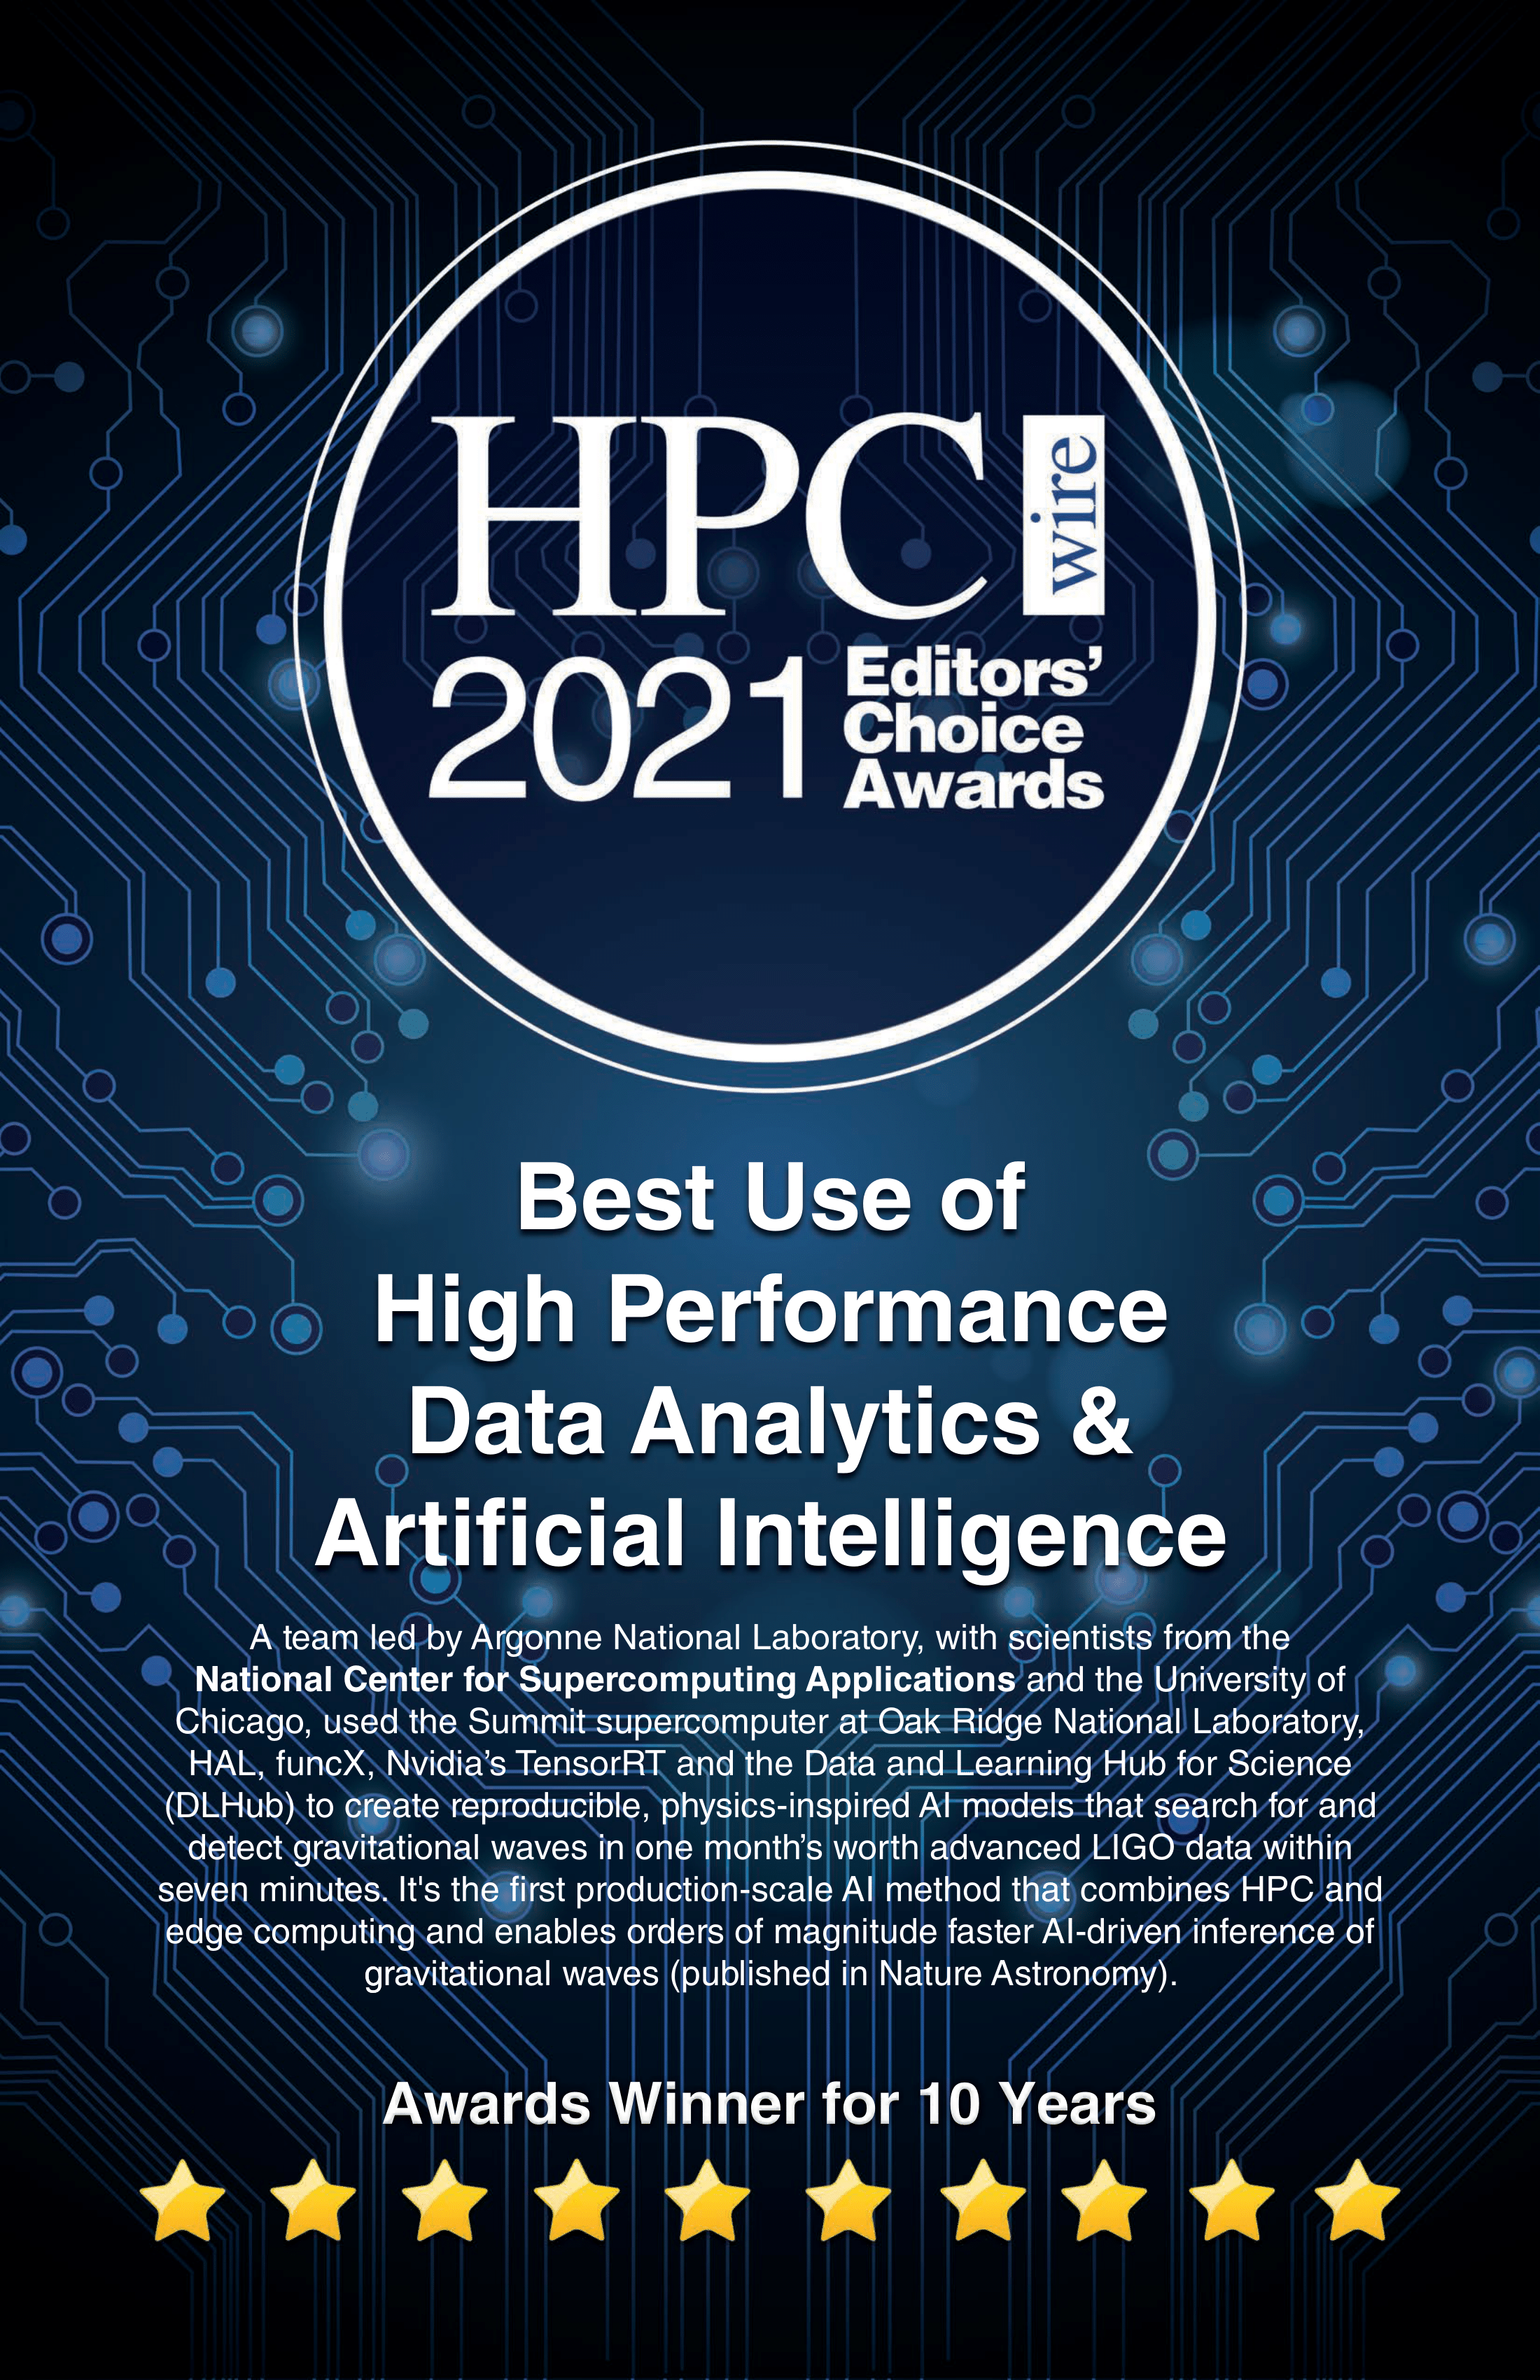 2021 HPCwire Editor's Choice Best Use of High Performance Data Analytics and Artificial Intelligence